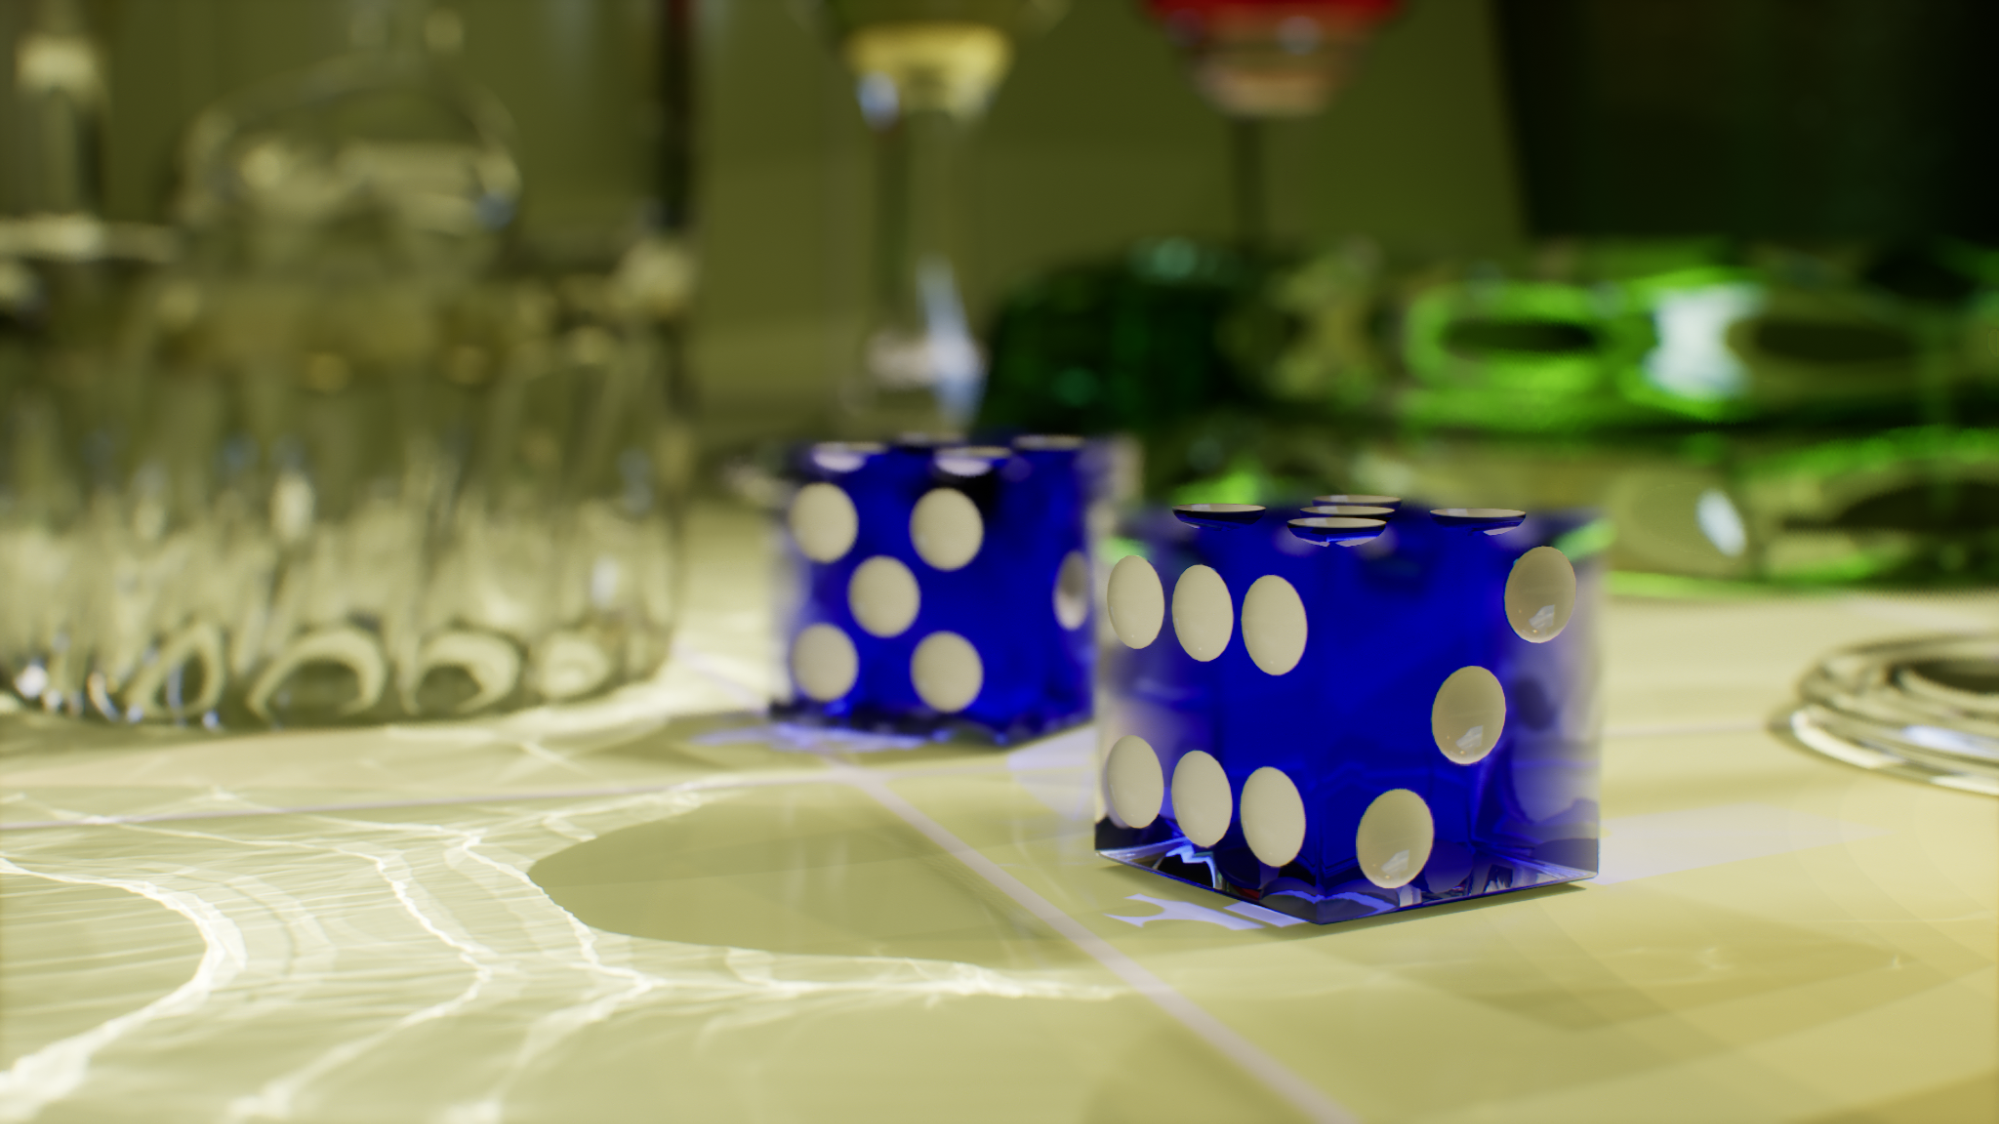 Close up caustics raster depth of field image of translucent blue dice on table surrounded by glass objects.